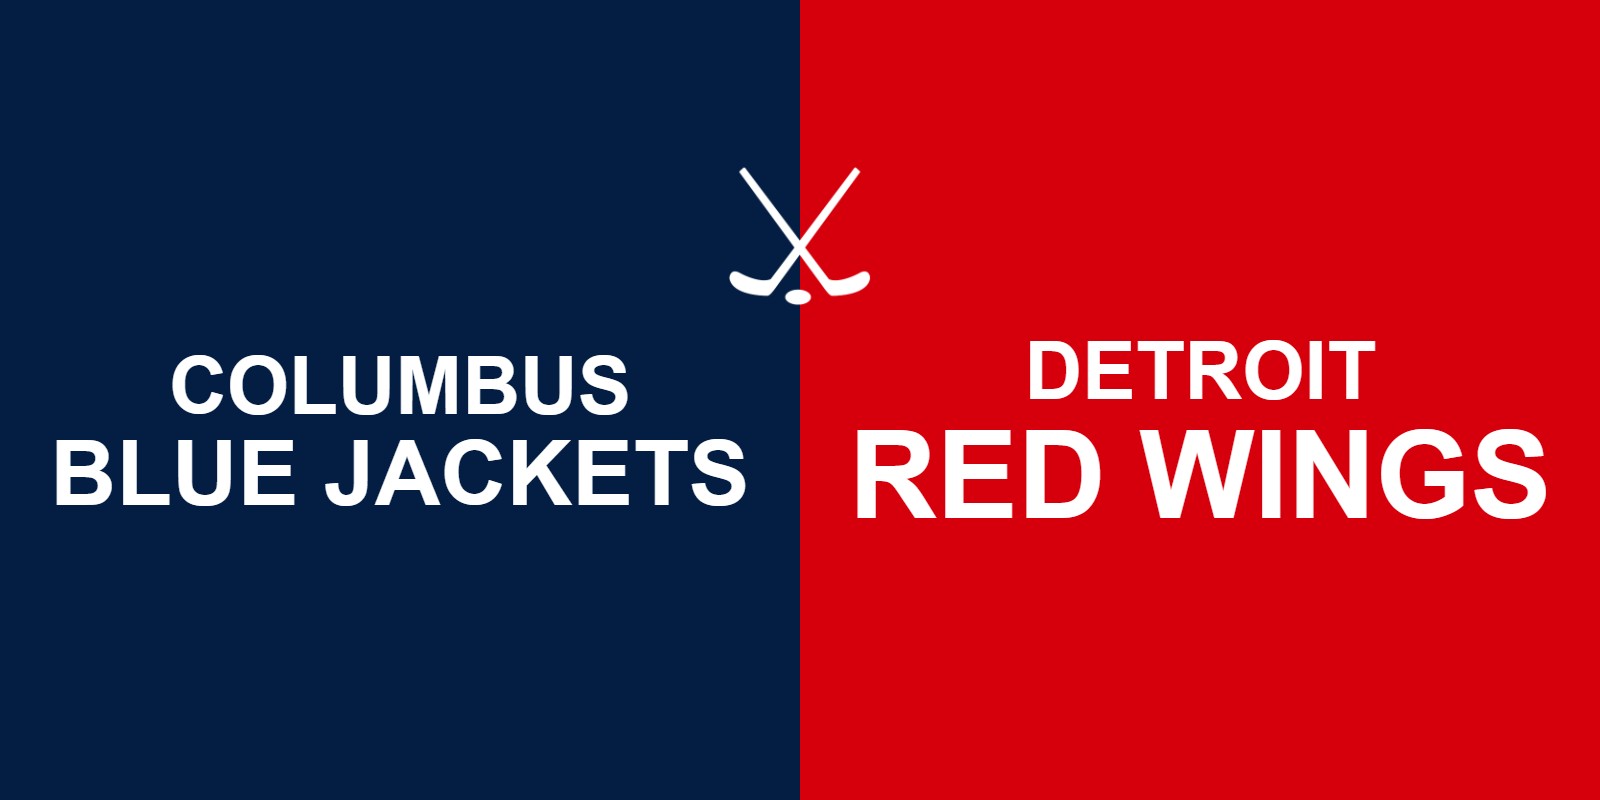 Blue Jackets vs Red Wings